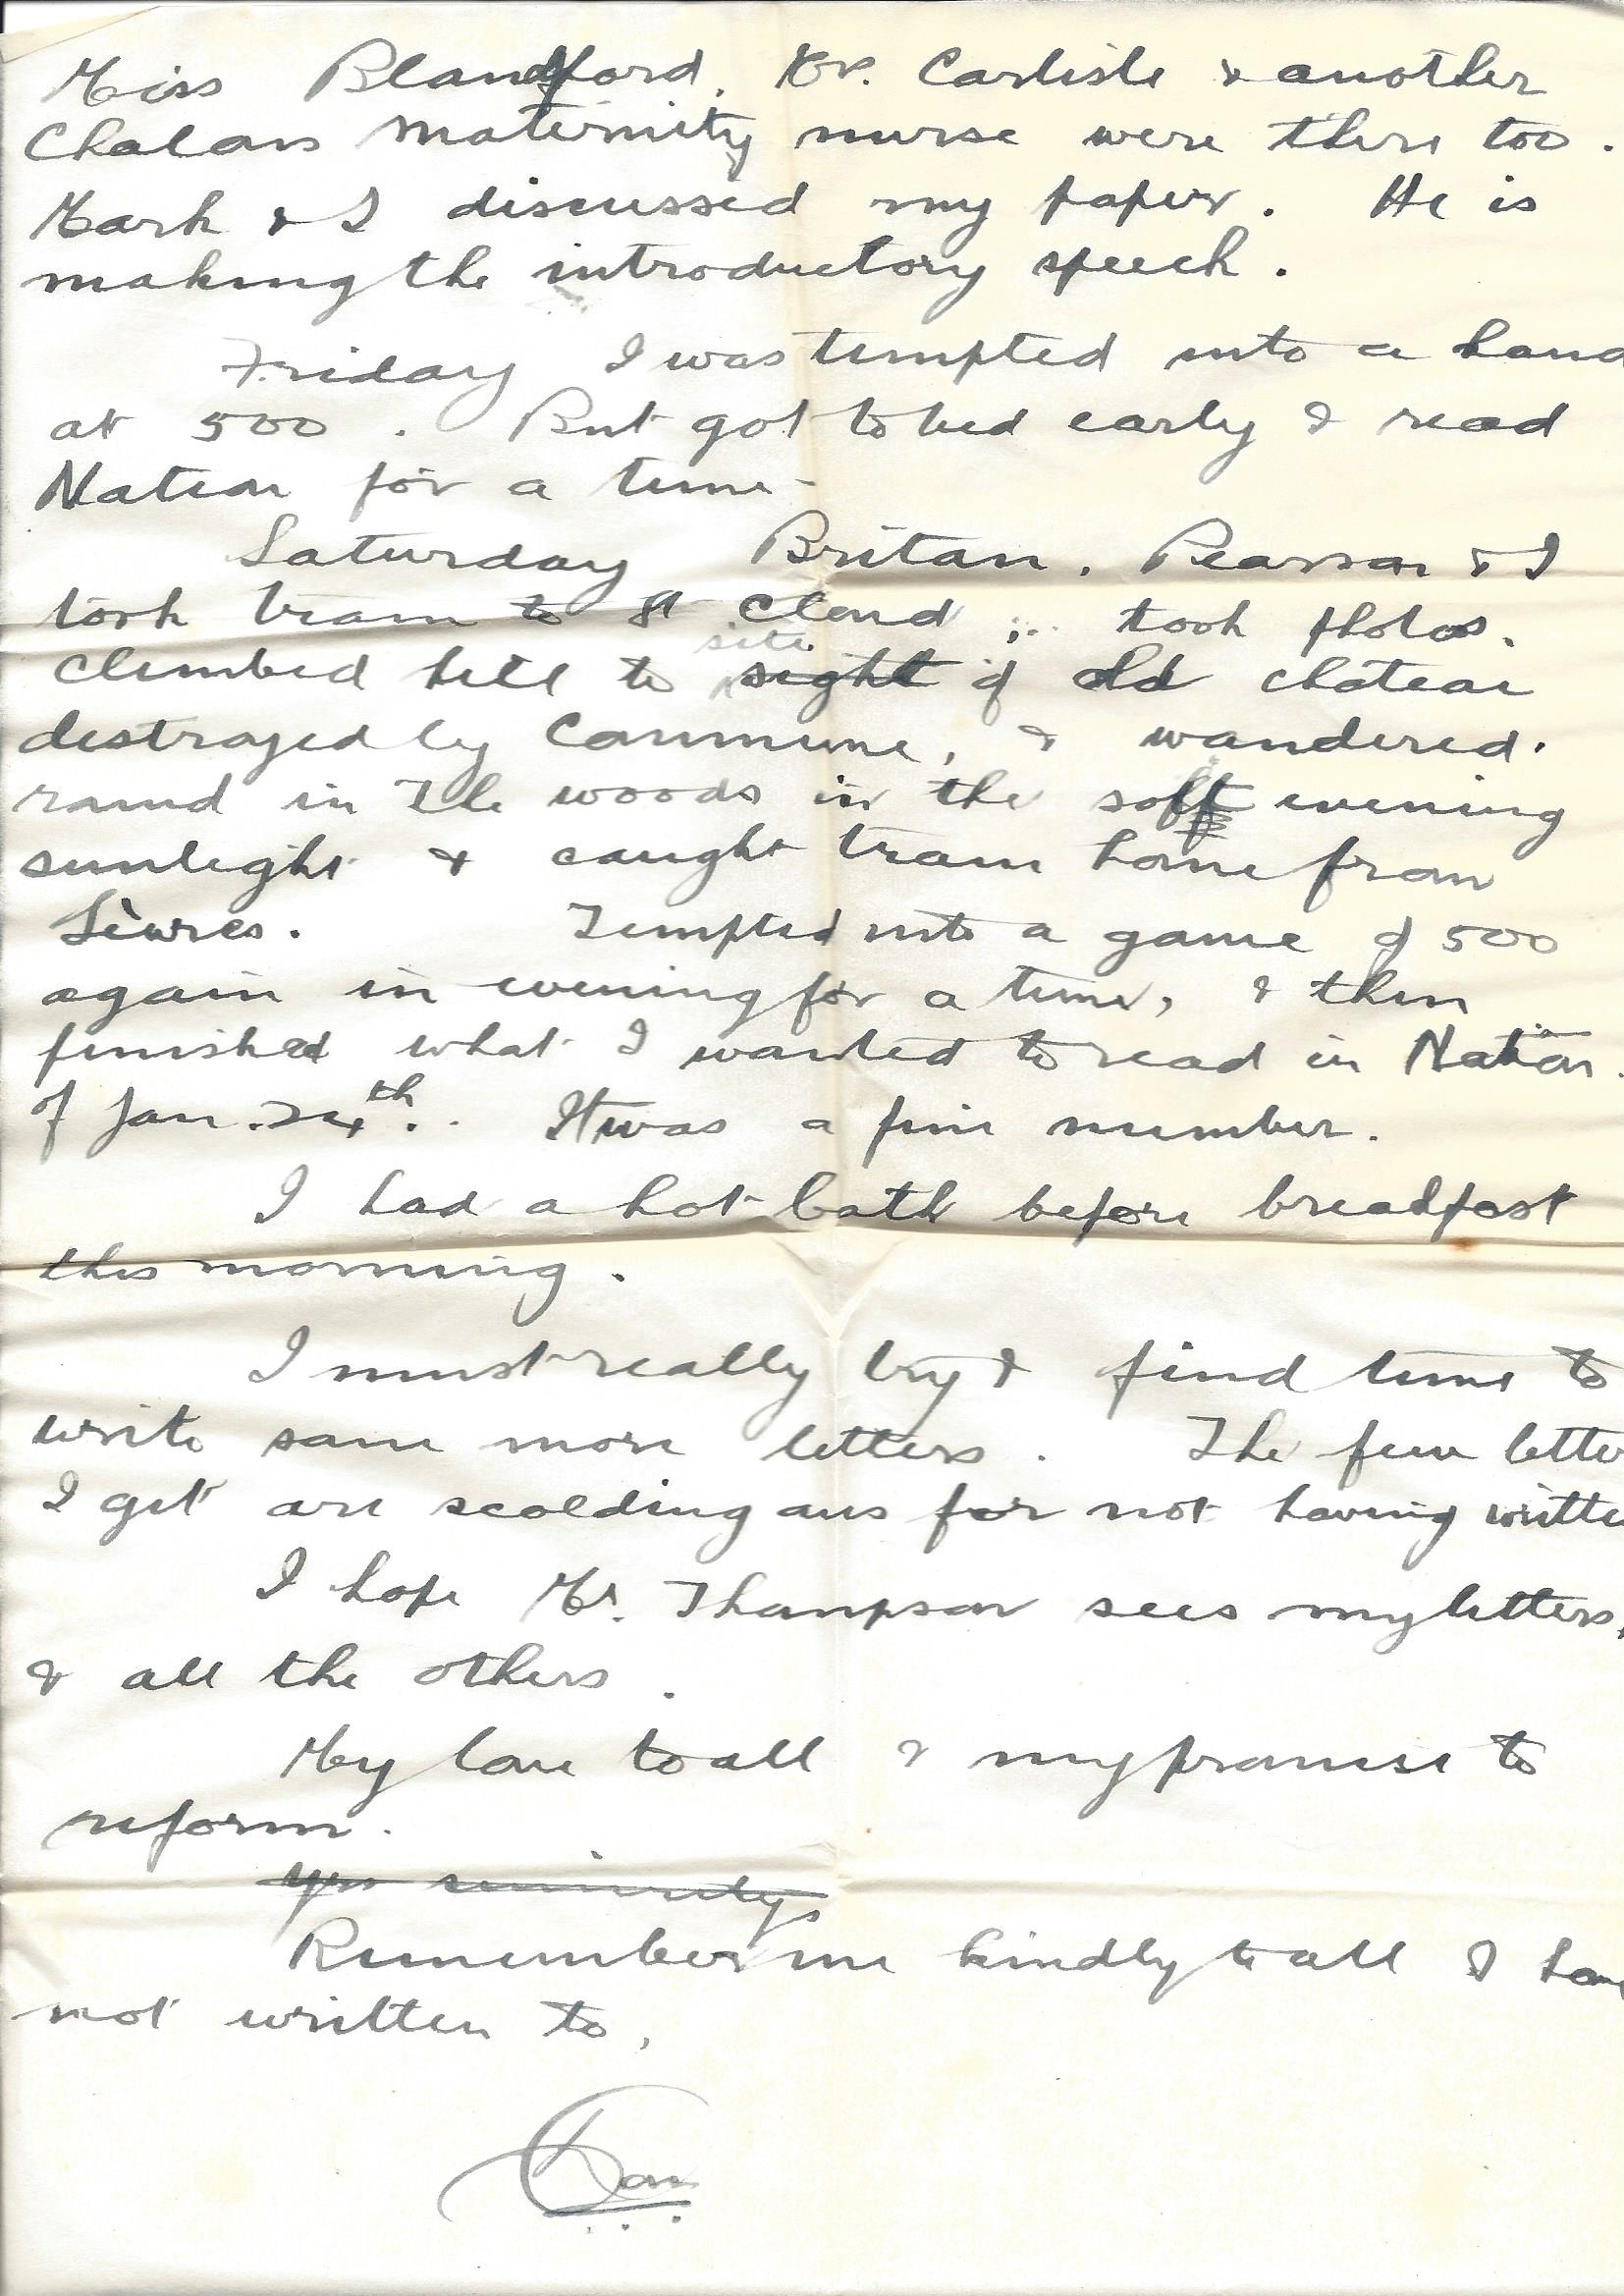 1920-02-08 page 4 letter by Donald Bearman